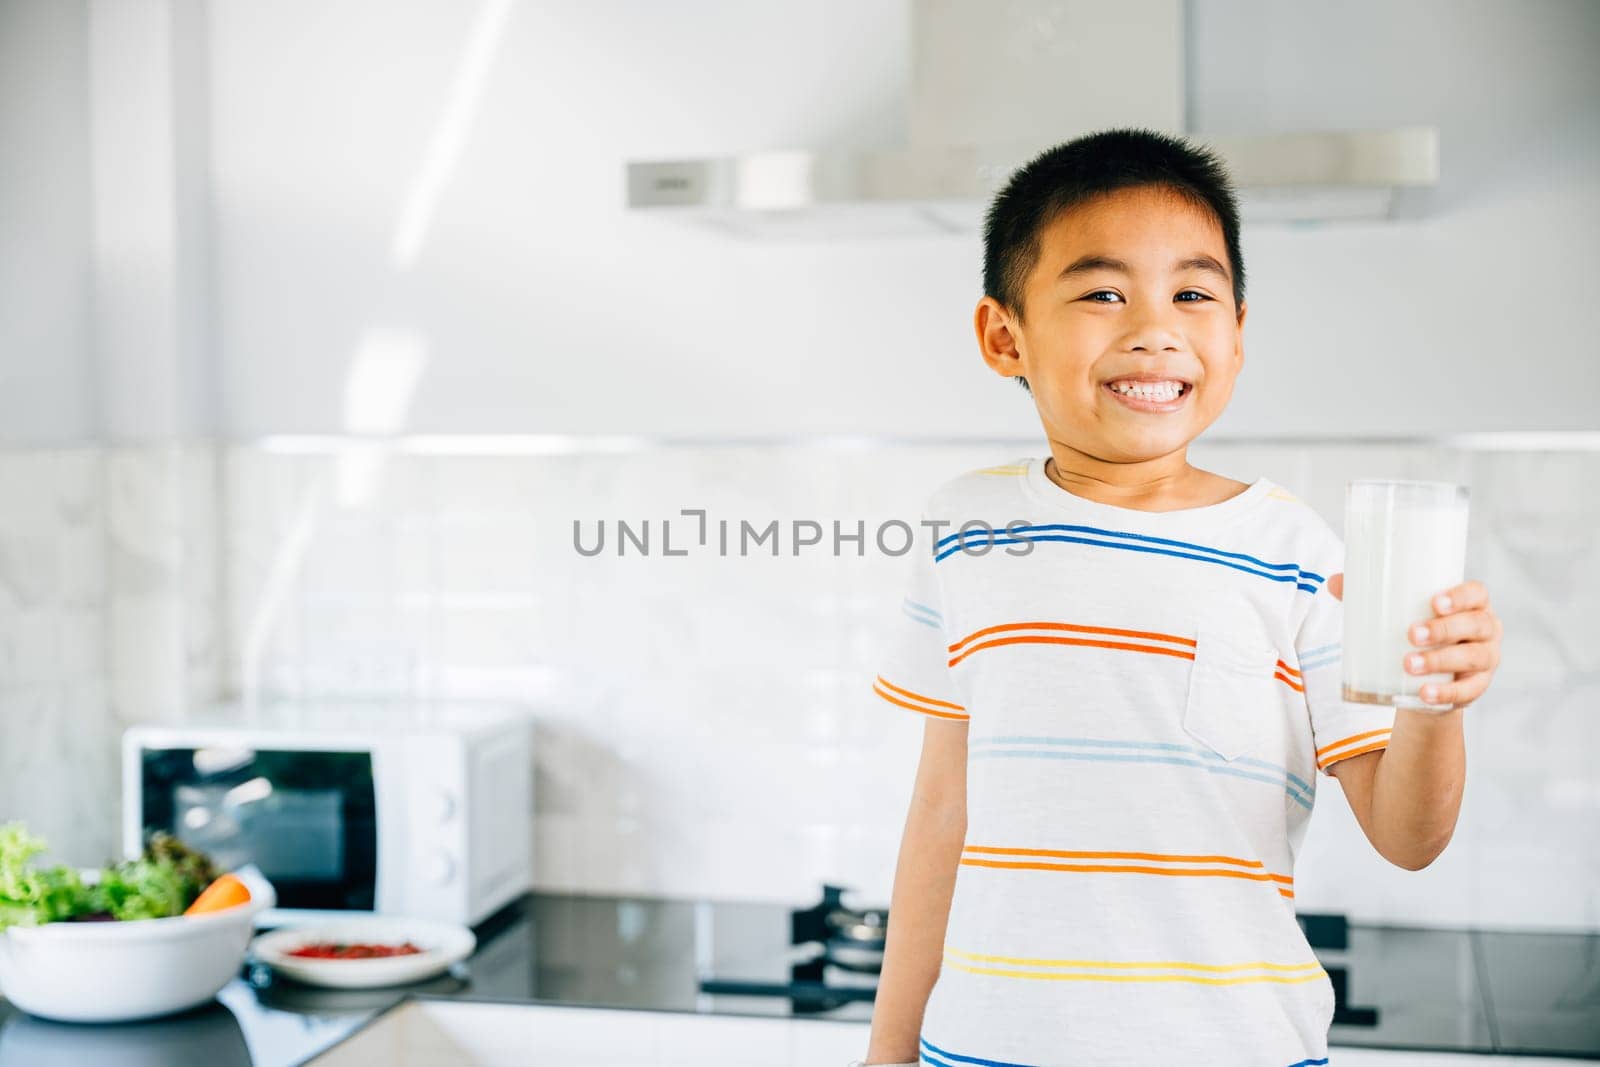 Portrait of happy Asian preschooler, boy holding milk in kitchen. Smiling son enjoys drink, radiating joy. Young child sips calcium-rich liquid, feeling cheerful at home give me.